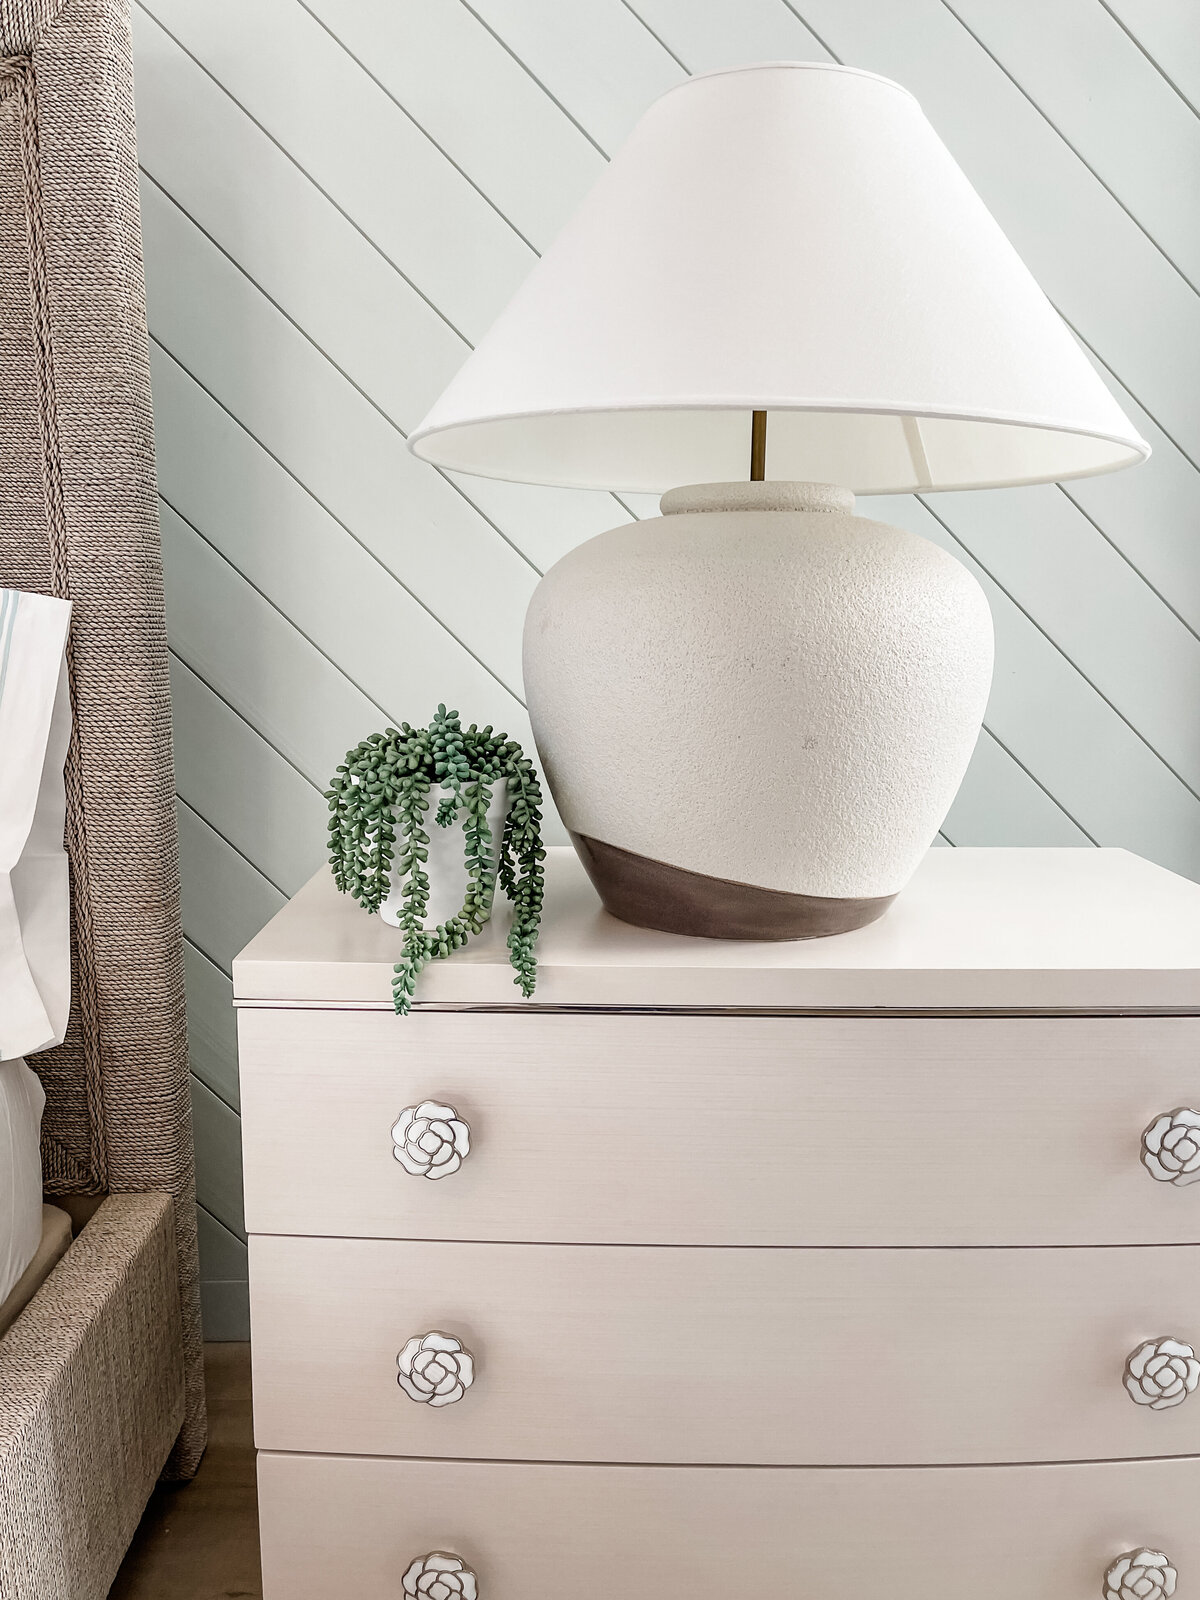 coastal home Master Bedroom Nightstand and Lamp by Island Home Interiors Lake Nona